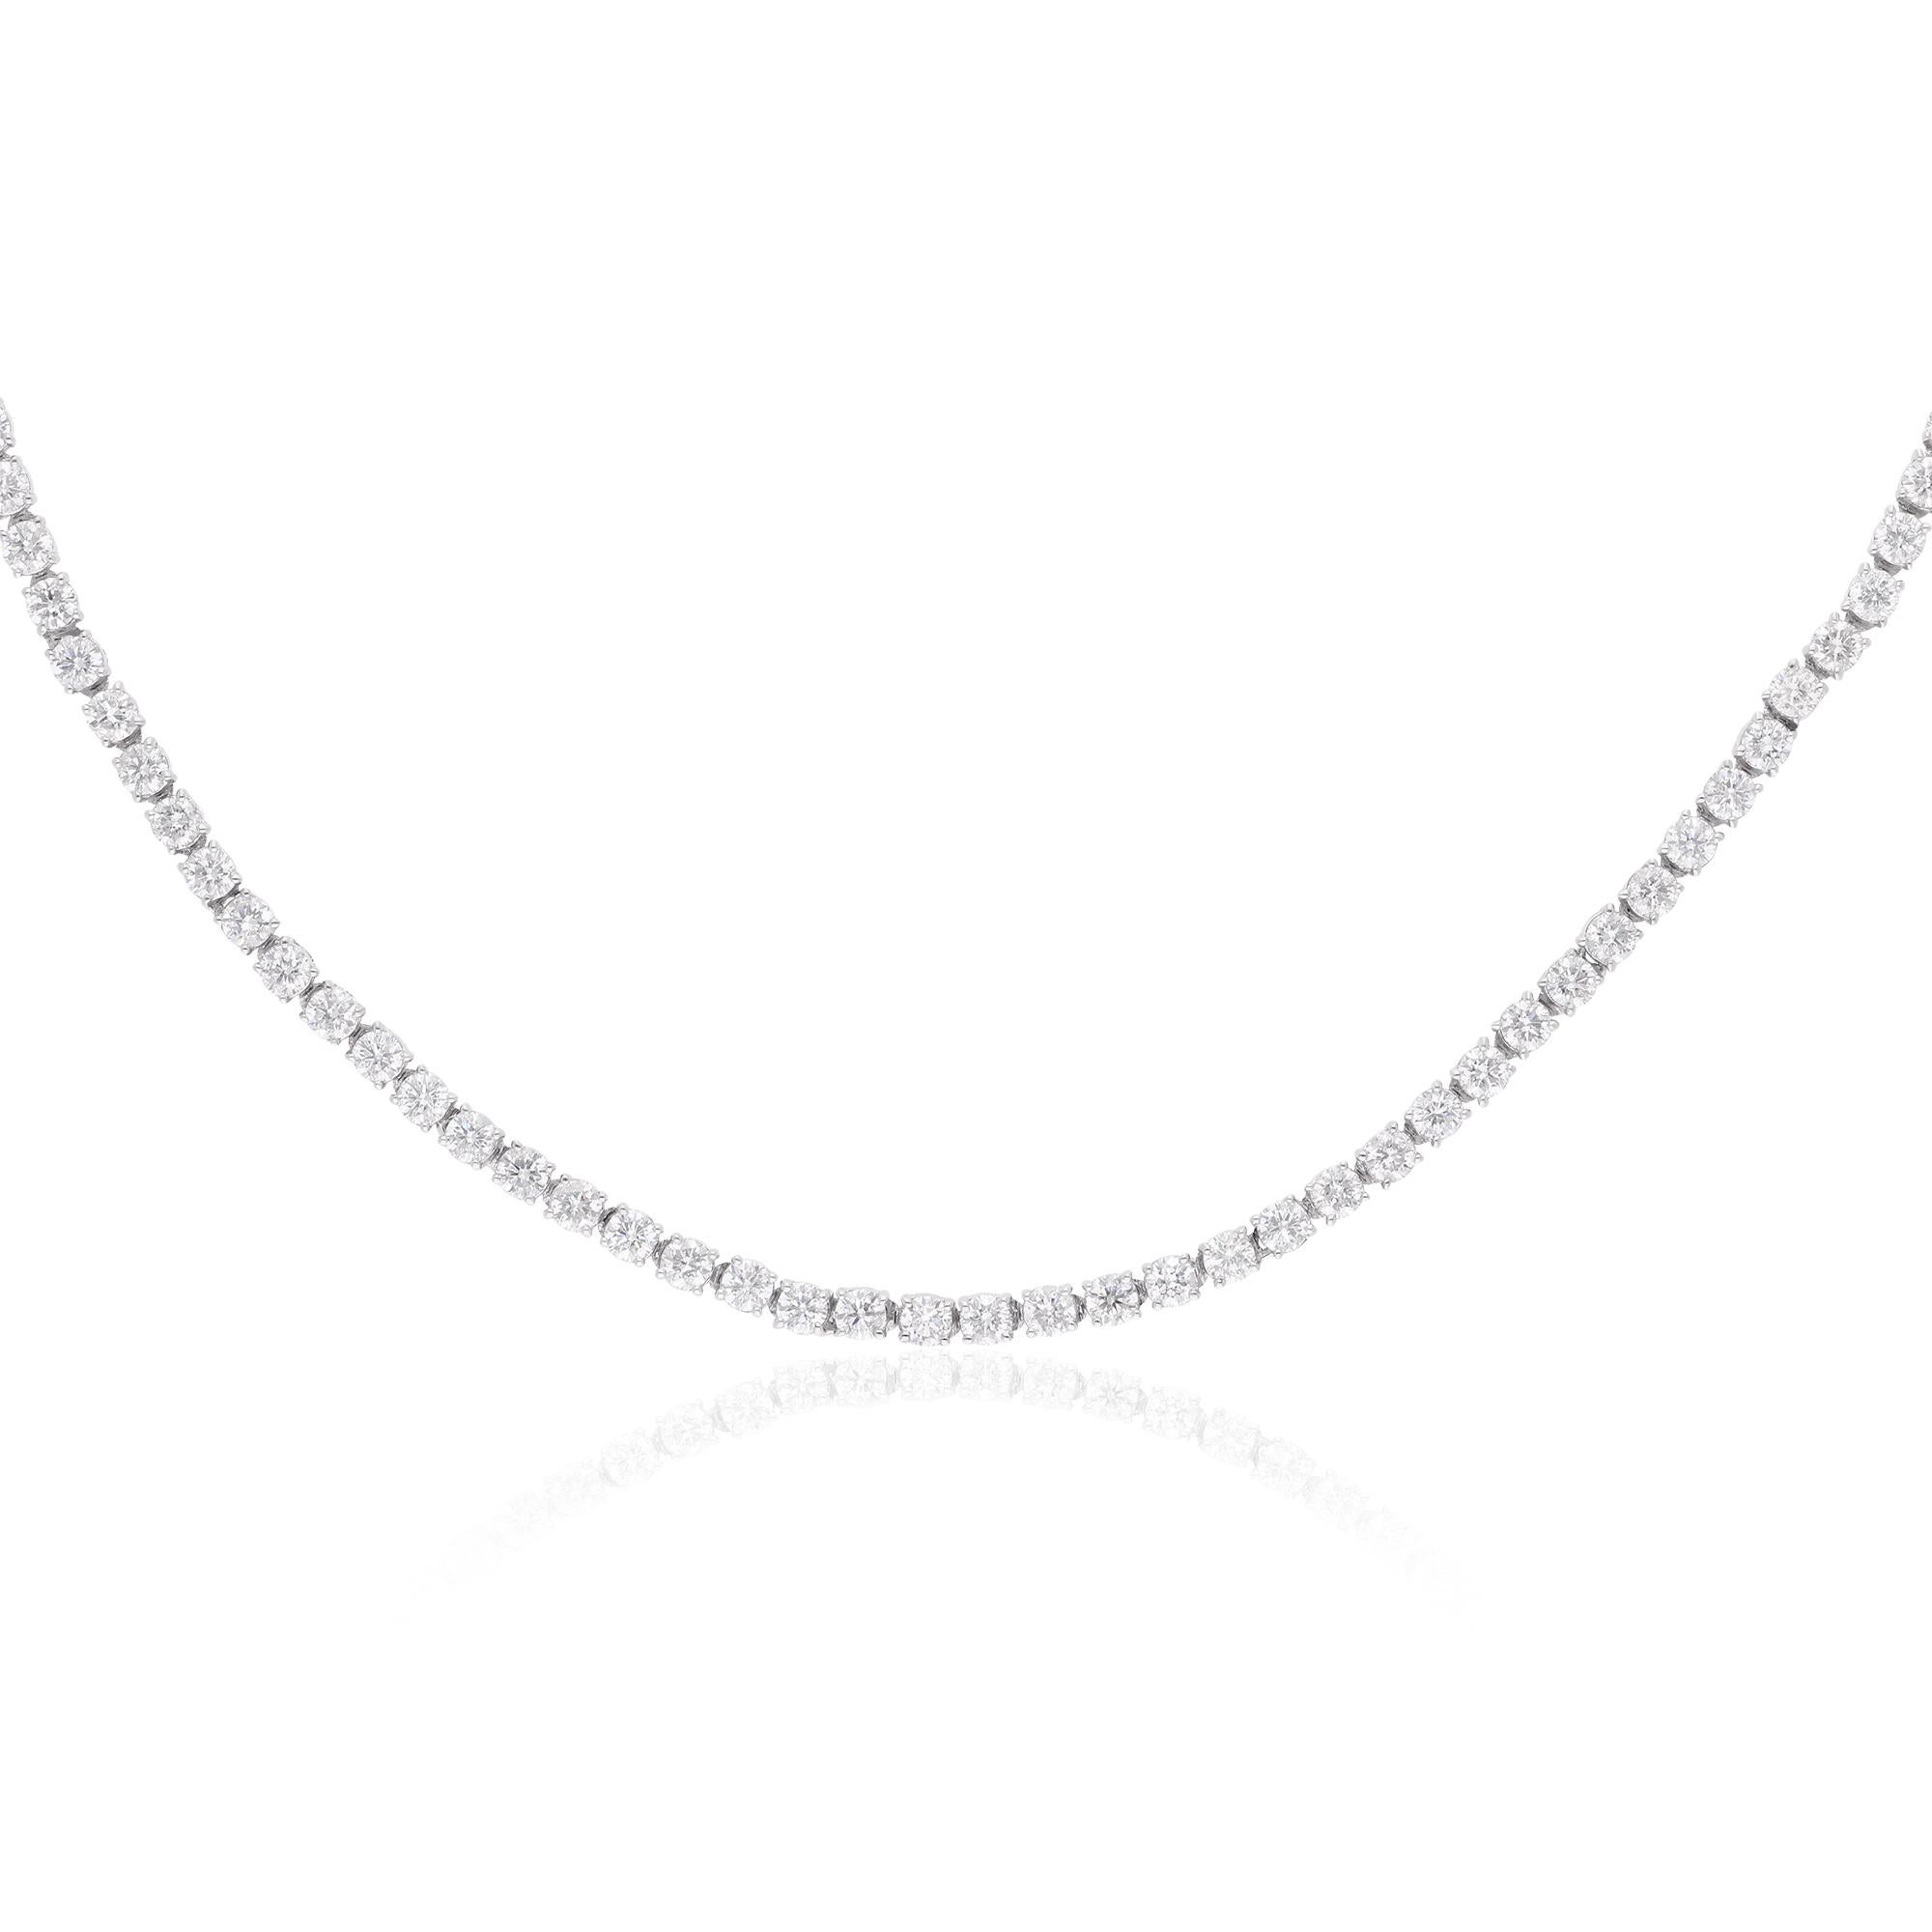 The round diamond is delicately suspended from a sleek white gold chain, adding a touch of modernity and refinement to the design. The solid 18 karat white gold setting provides a luxurious backdrop for the diamond, enhancing its brilliance and